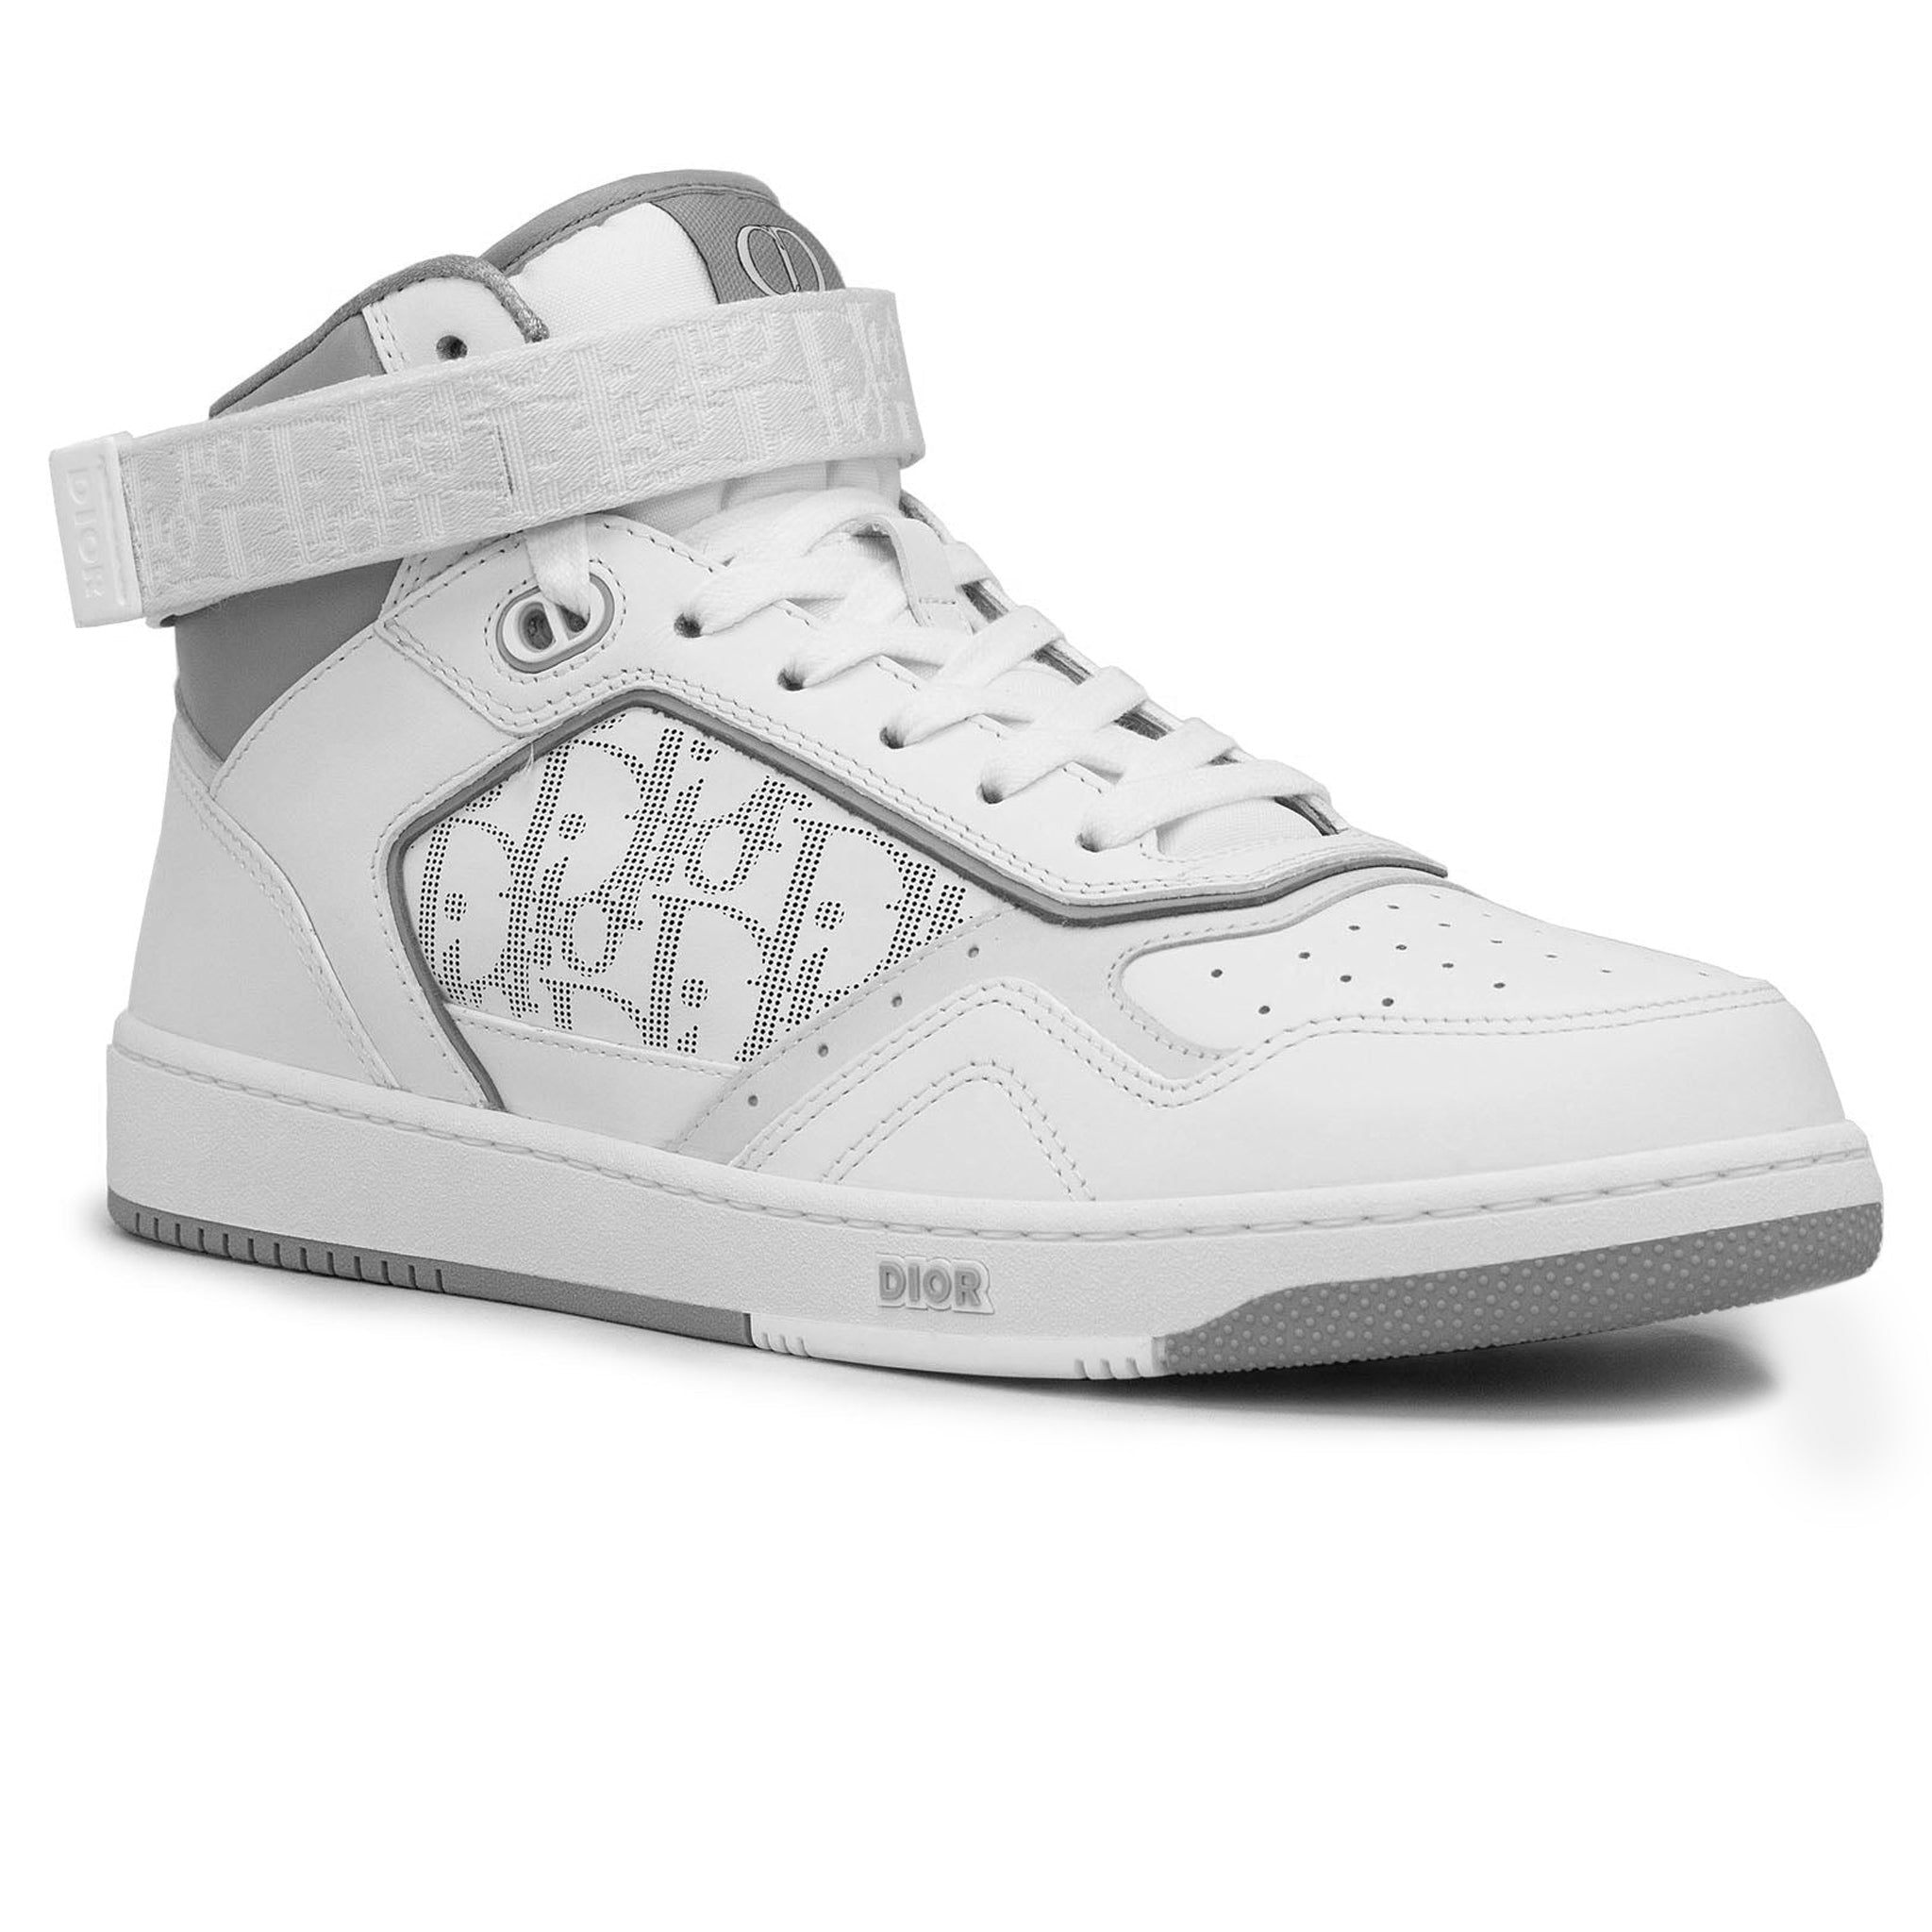 B27 HighTop Sneaker Blue Cream and Dior Gray Smooth Calfskin with Beige  and Black Dior Oblique Jacquard  DIOR BG